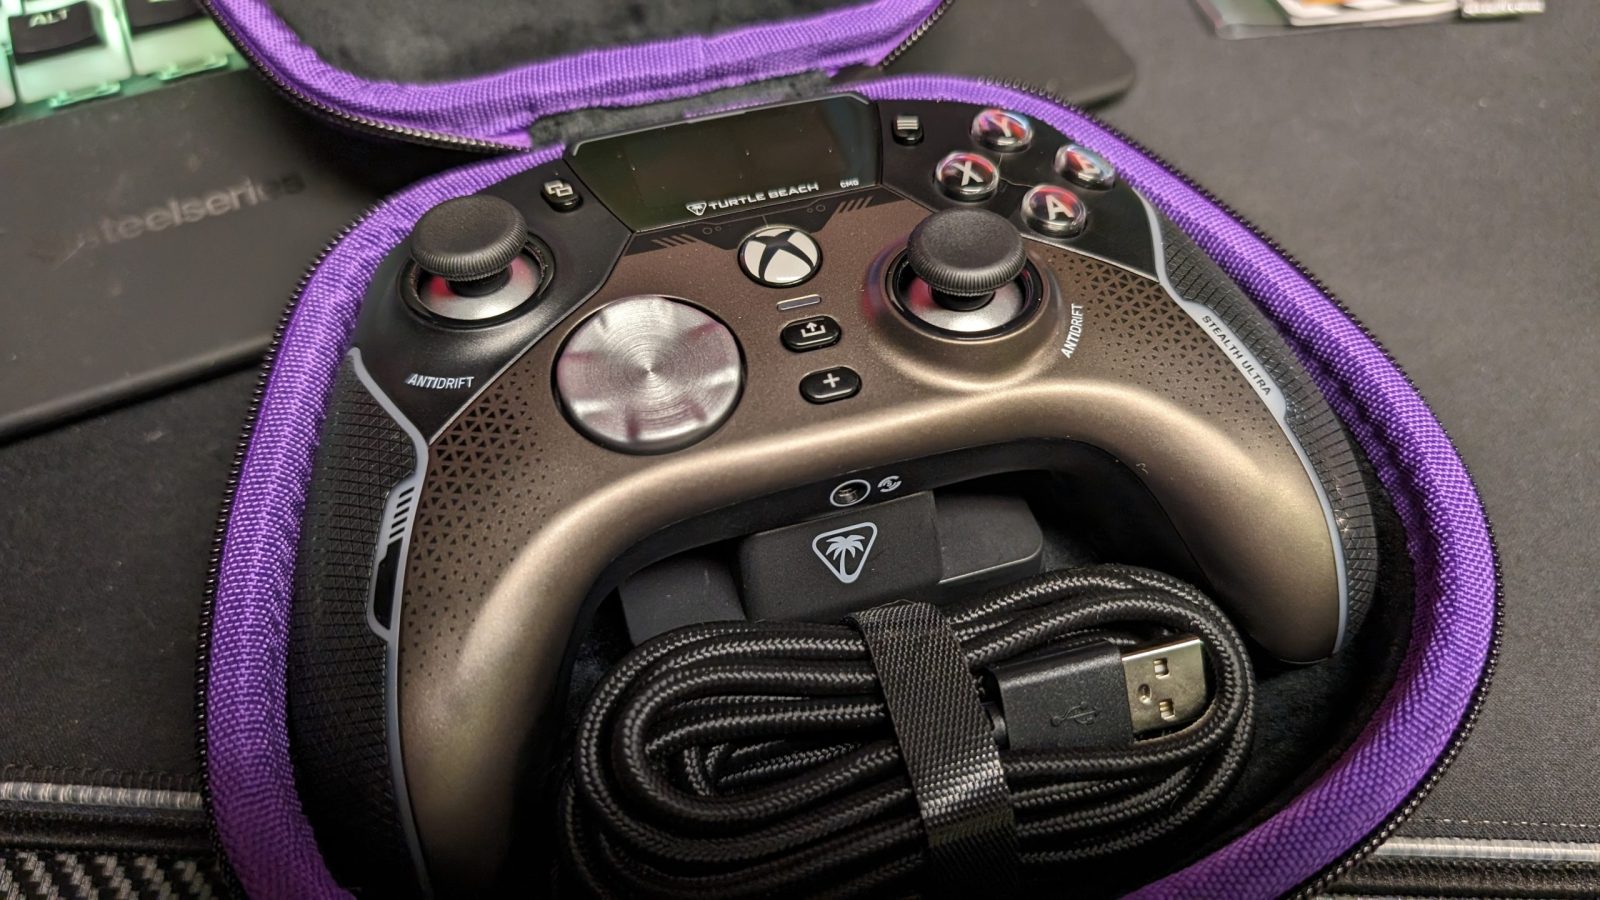 New Wireless Gaming Controller: The Stealth Ultra